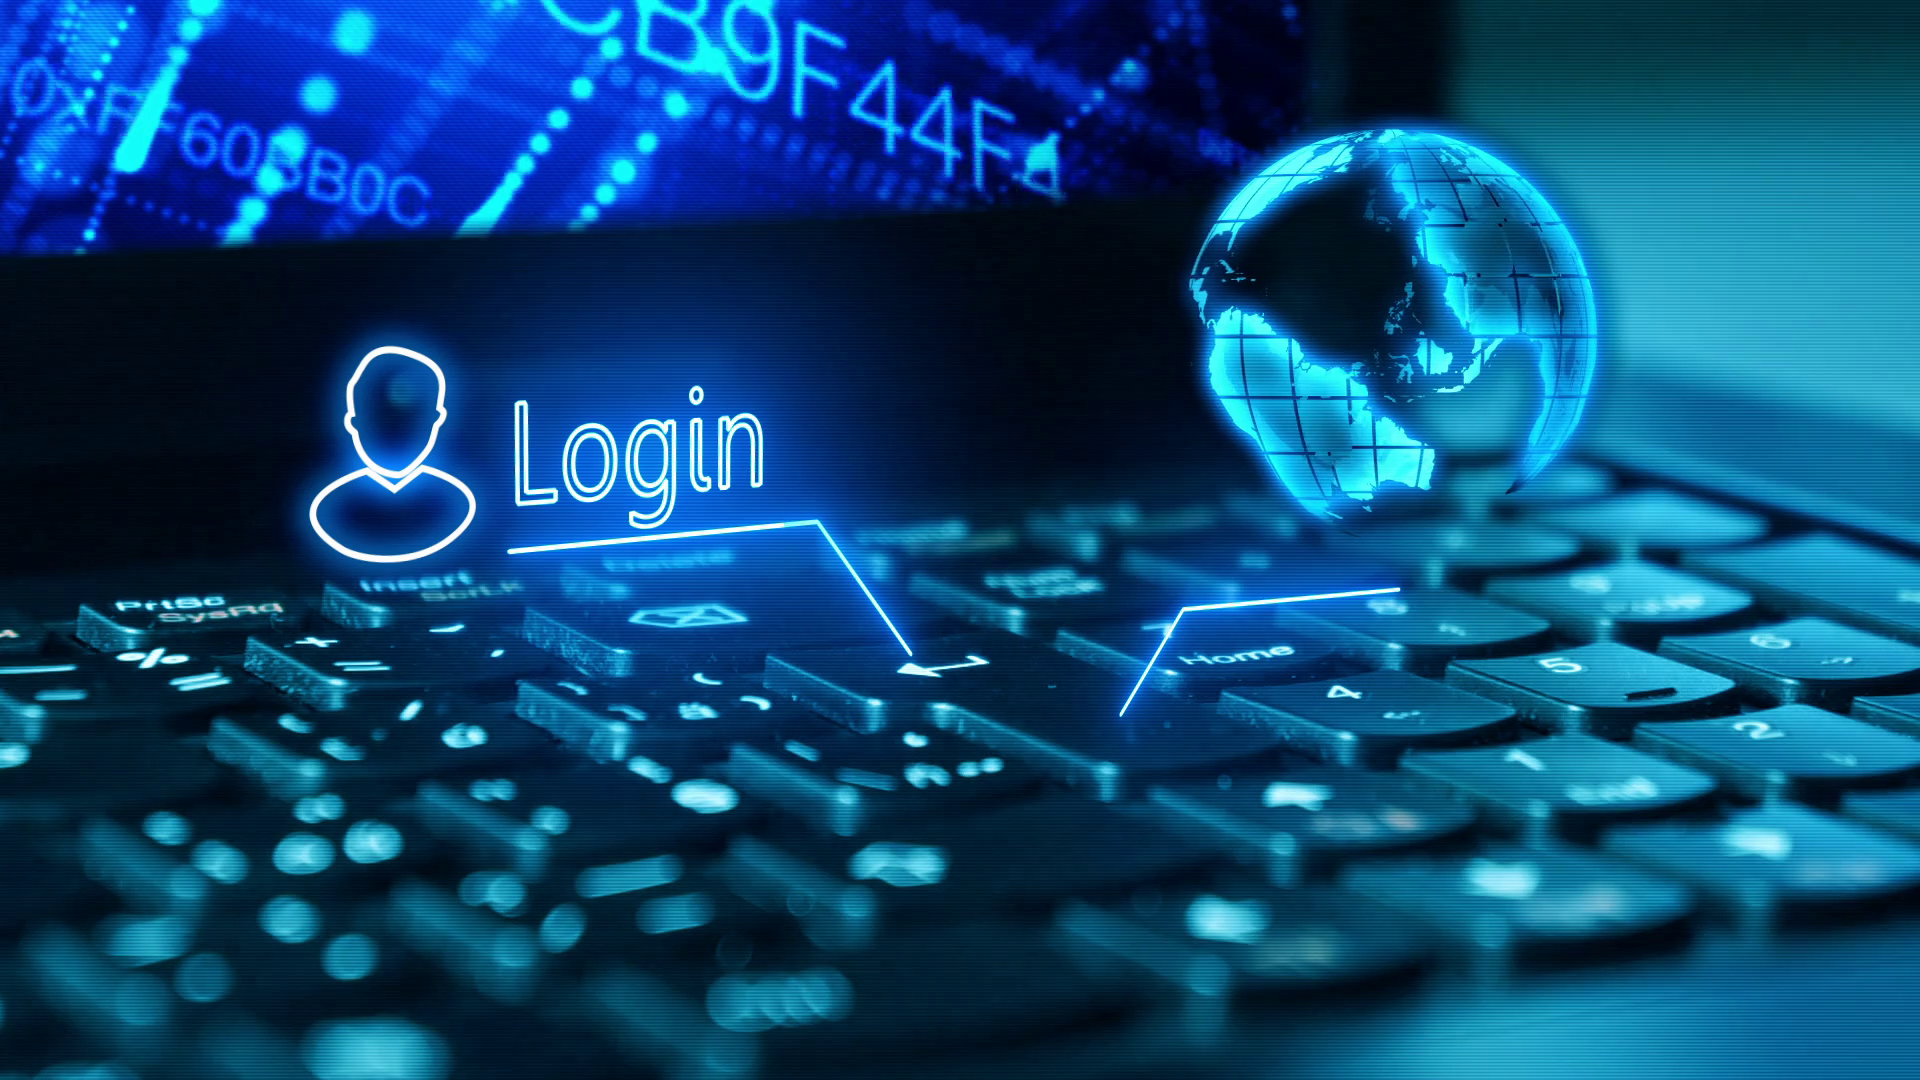 Log on to your bank account on a laptop Logging in with security